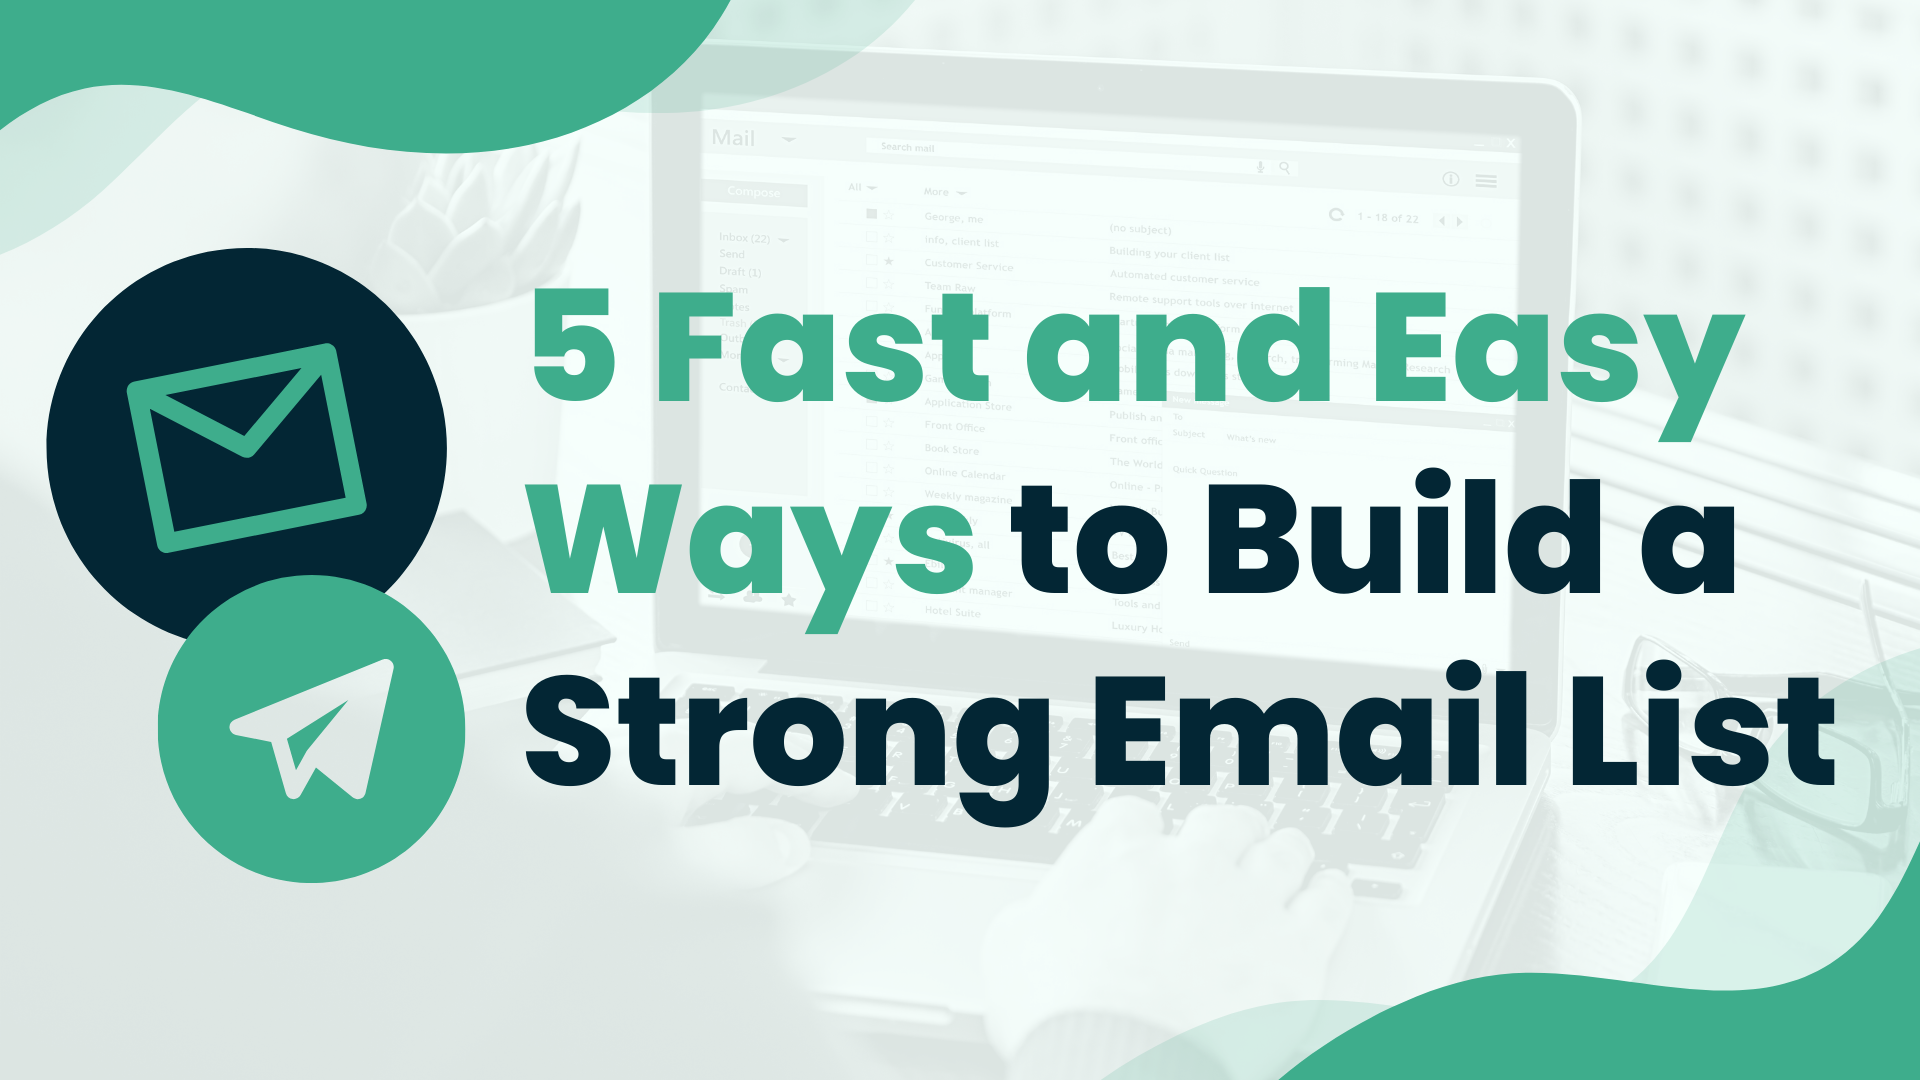 5 Fast and Easy Ways to Build a Strong Email List